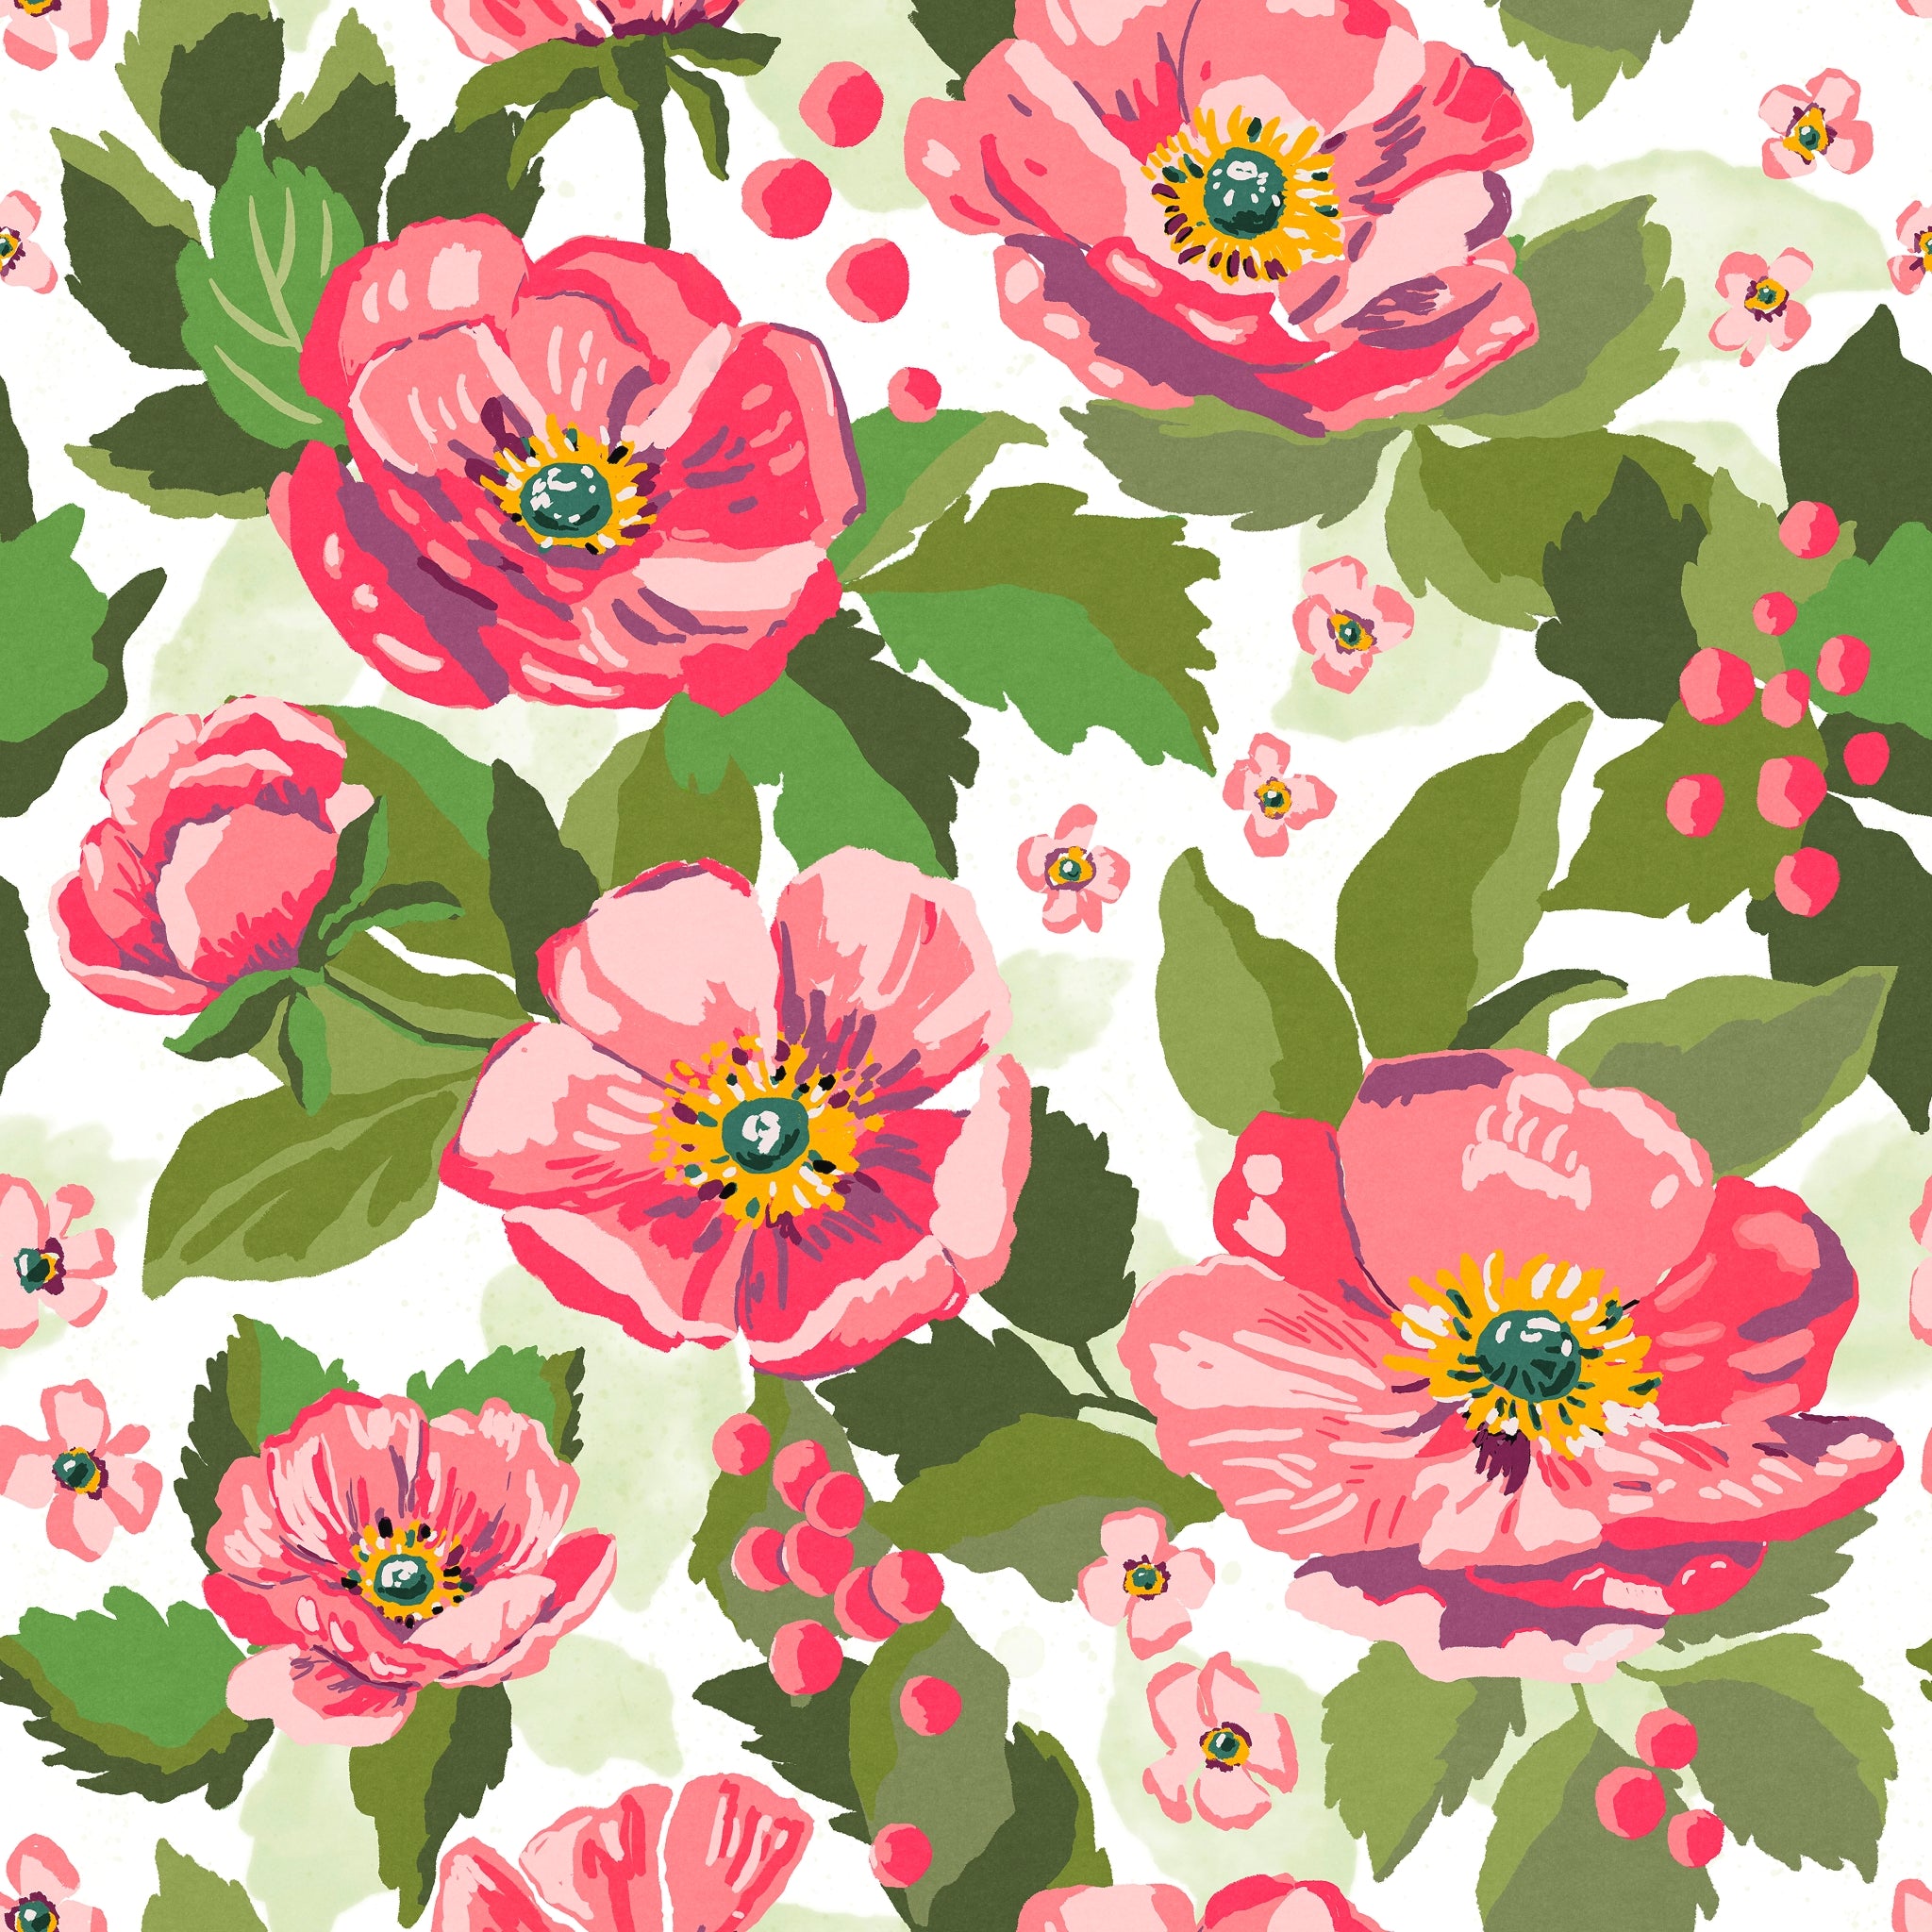 Alt: "Anemones Wallpaper by Wall Blush in a vibrant floral pattern for a stylish living room decor focus."